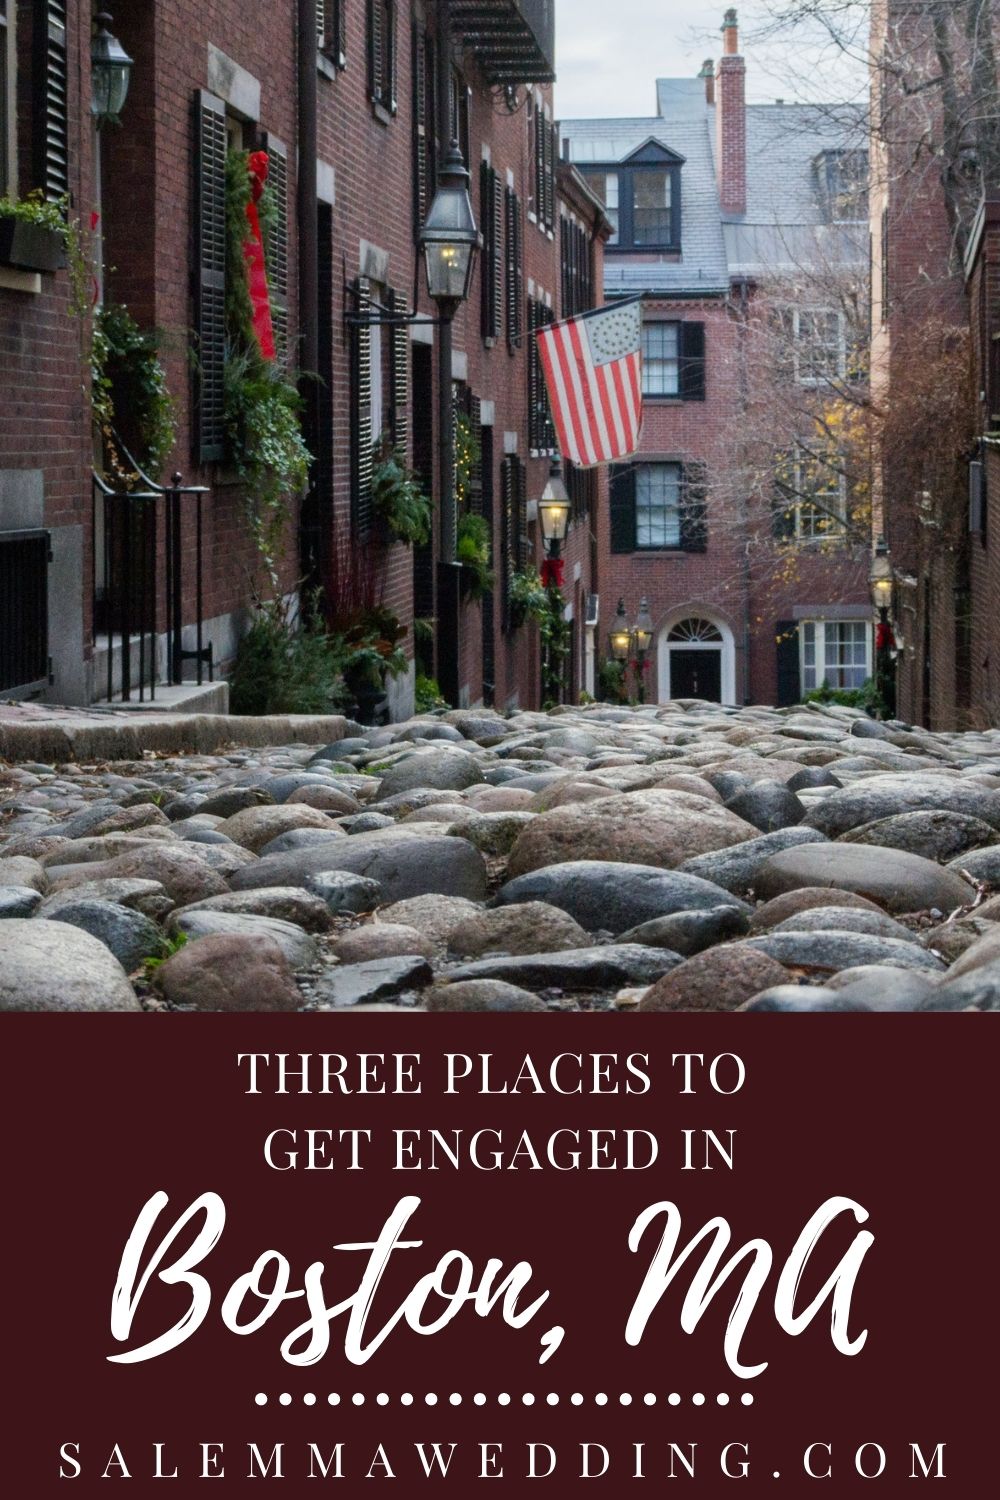 salem ma wedding, places to get engaged in boston ma